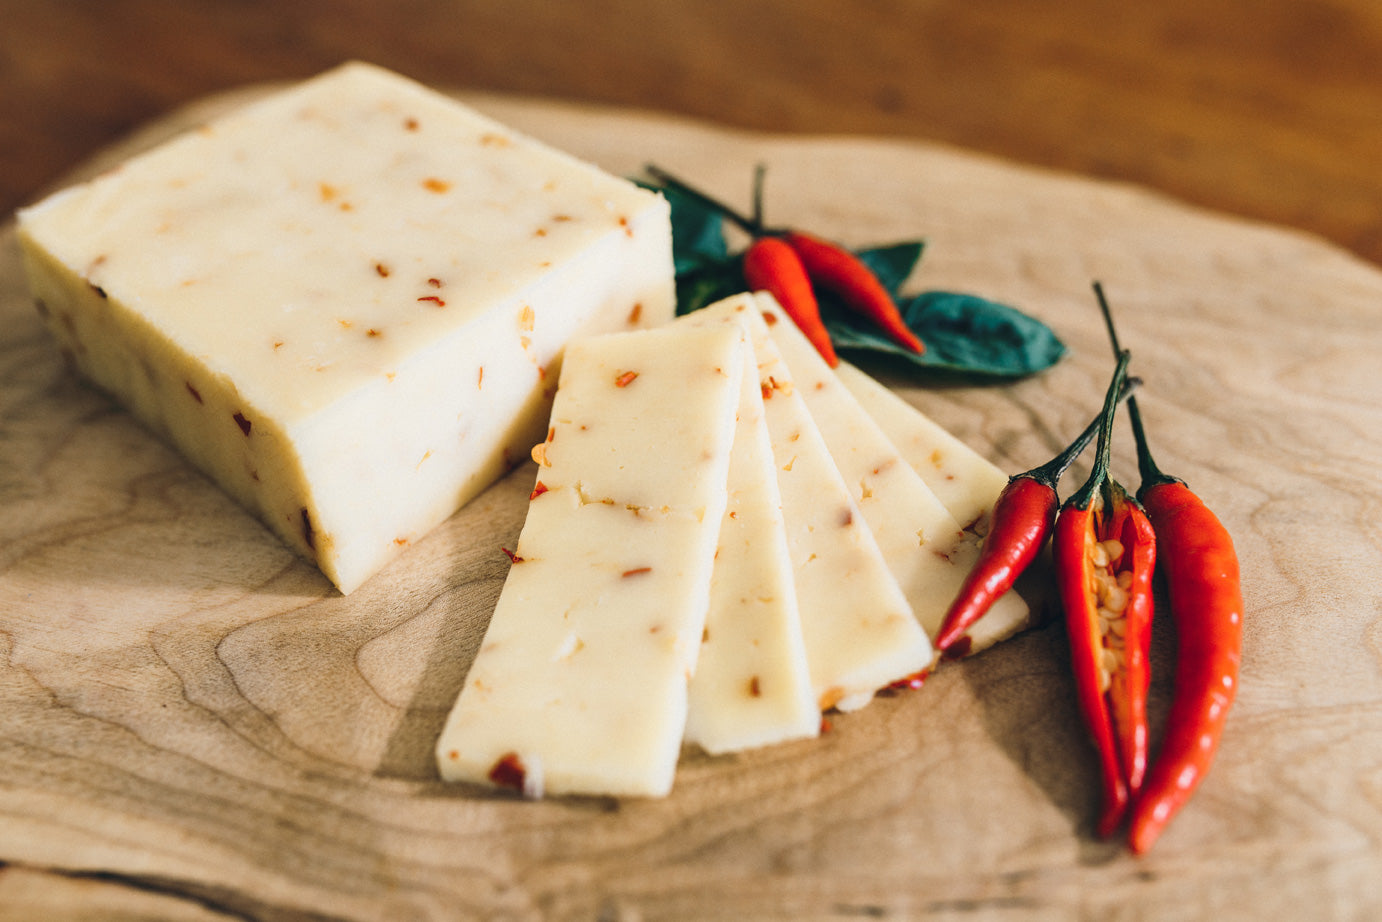 Hot Jill cheese is shown on a wooden board next to fresh chili peppers. The cheese is flecked with red chili flakes.